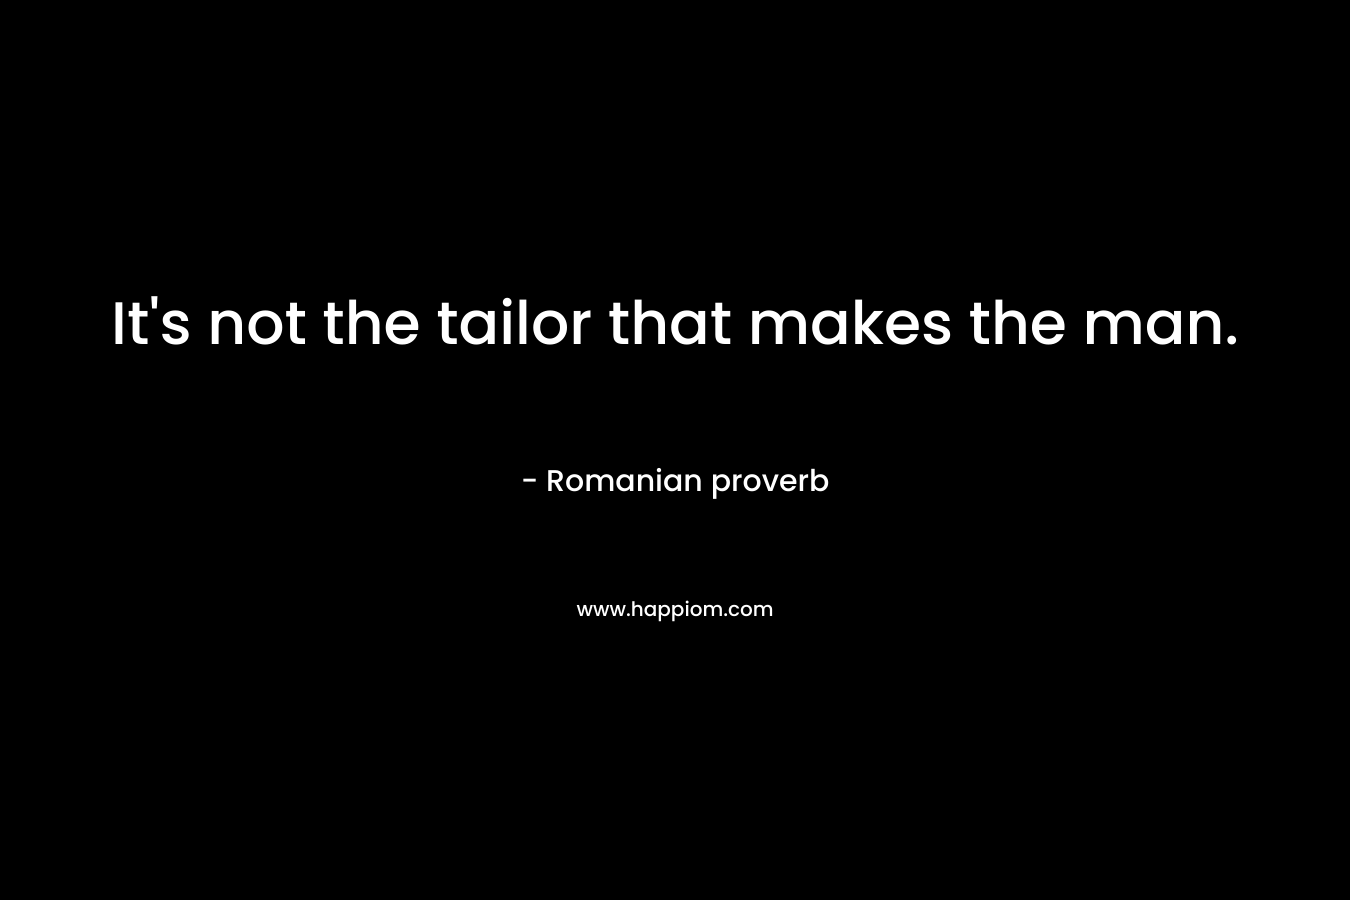 It's not the tailor that makes the man.